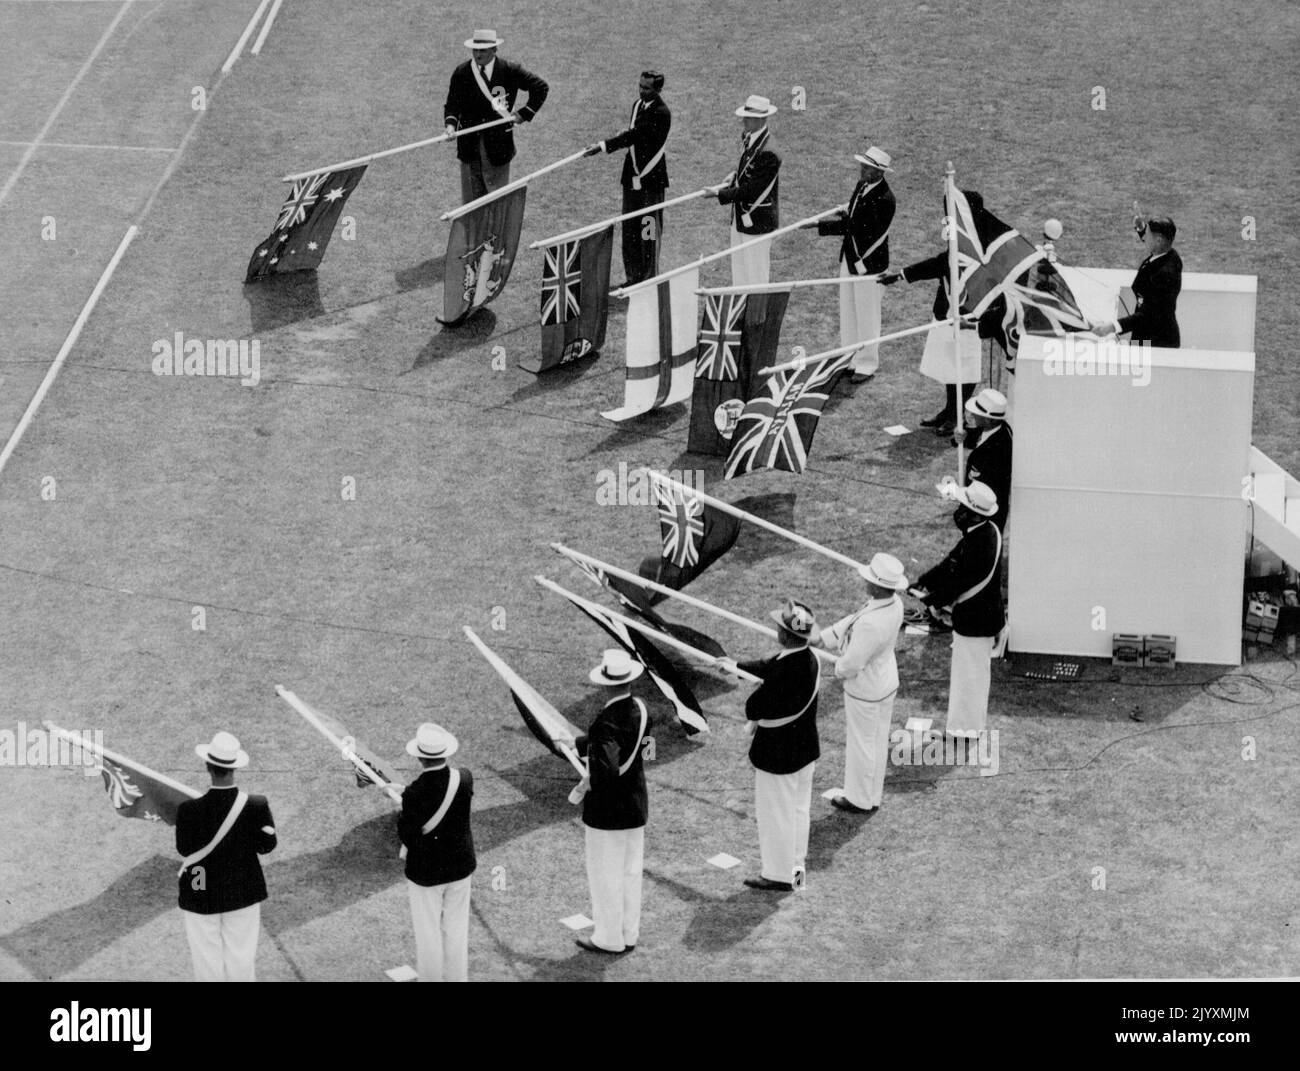 Empire Games Opening Ceremony at Eden park Feb 4. Stan Lay, New Zealand team captain, taking the oath of amateurism with Empire flags lowered. February 22, 1950. Stock Photo